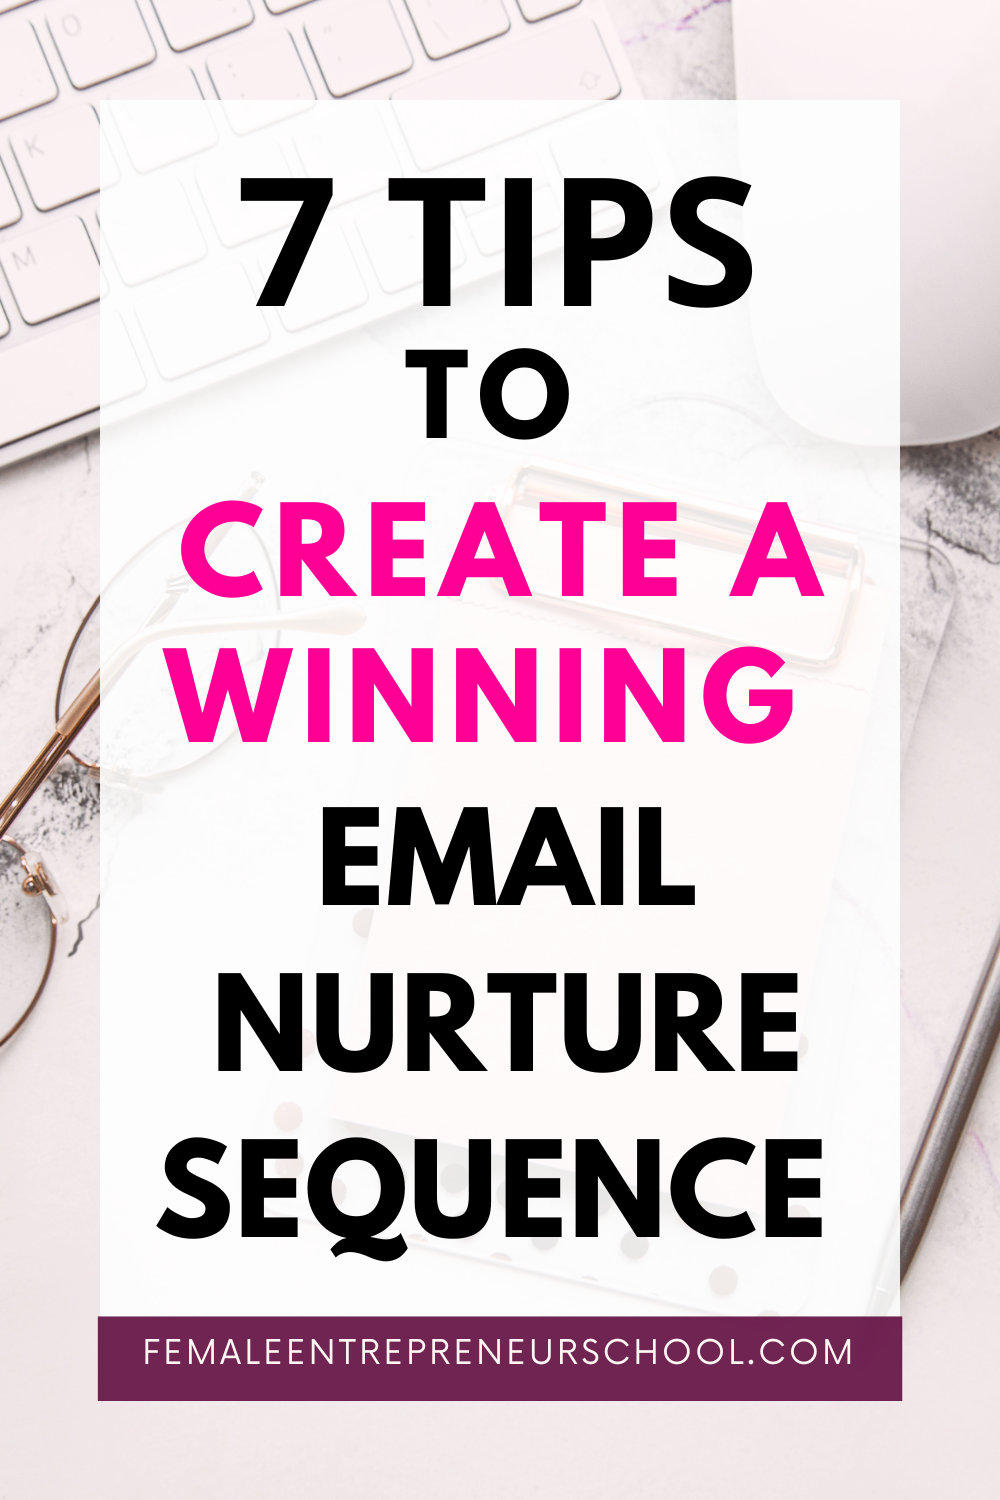 7 Tips To Create A Winning Email Nurture Sequence